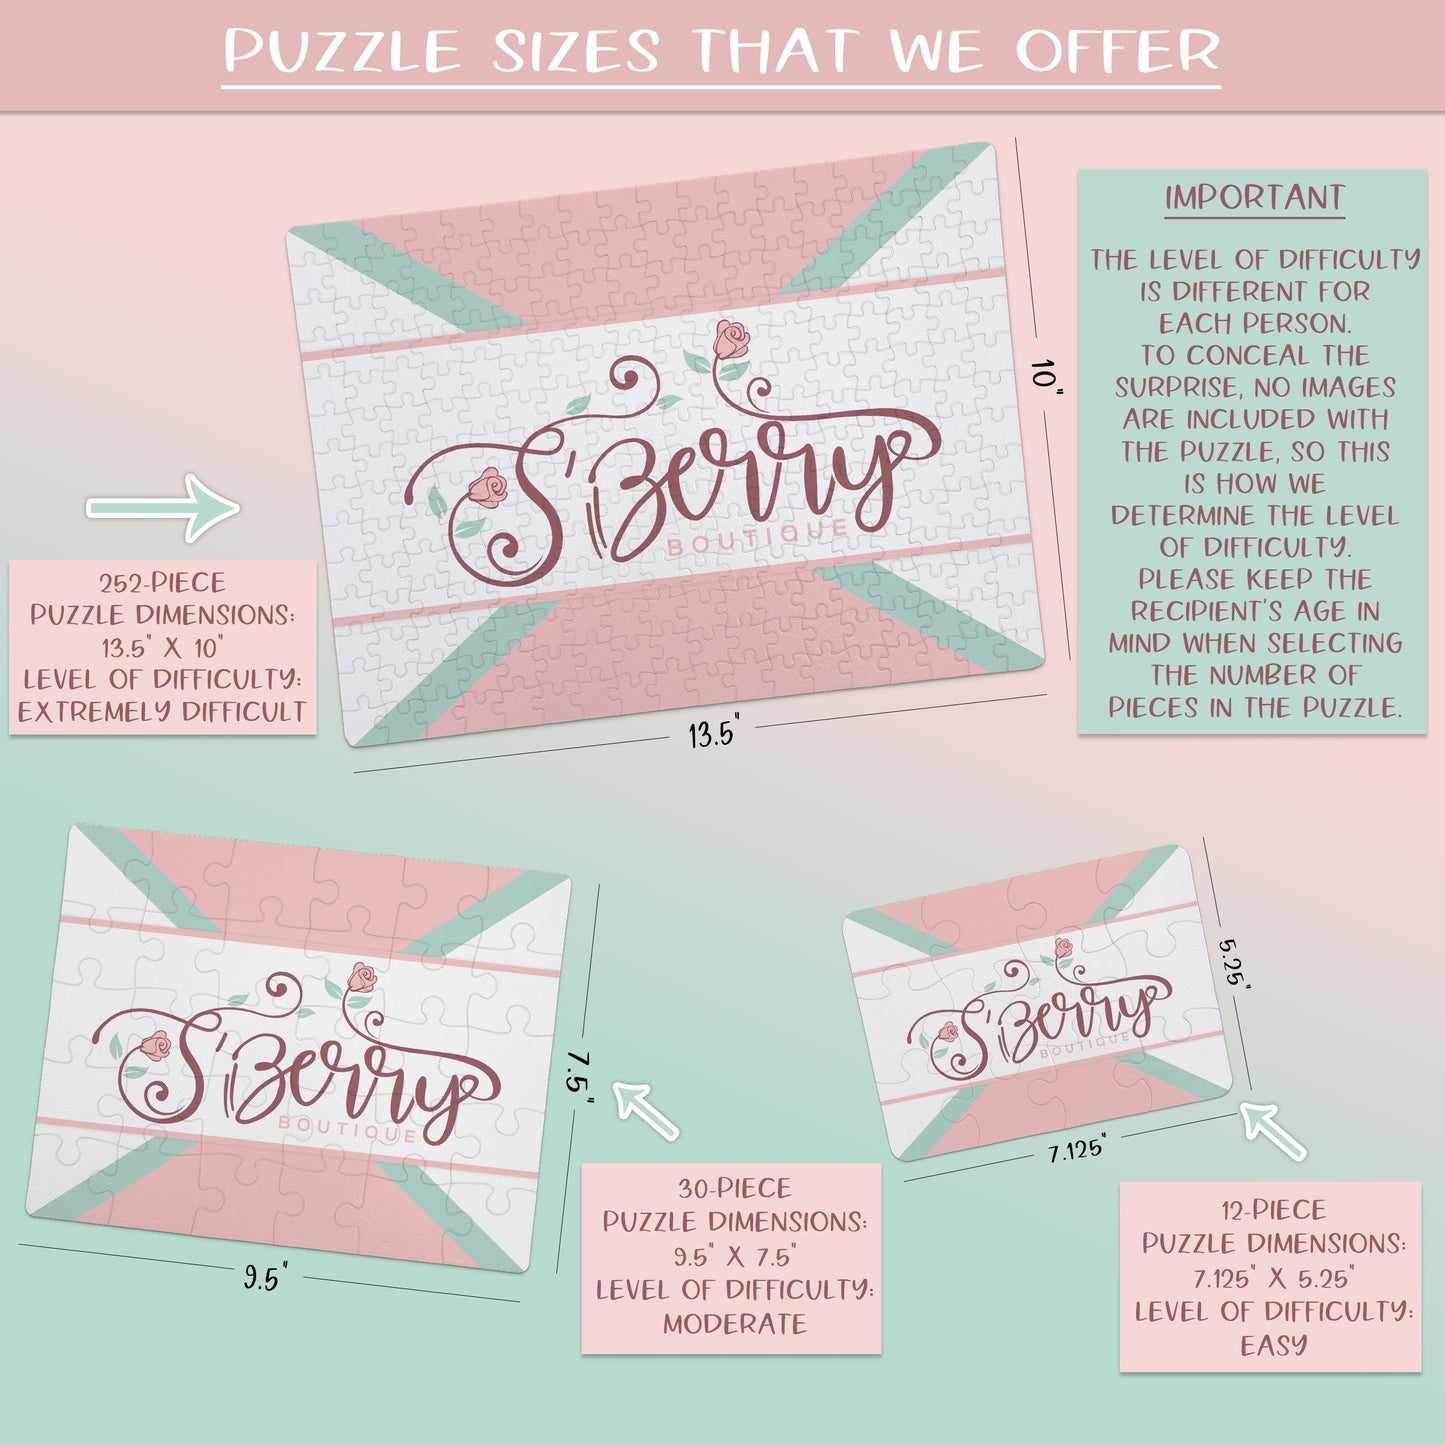 Create Your Own Puzzle - Floral Design - CYOP0070 | S'Berry Boutique